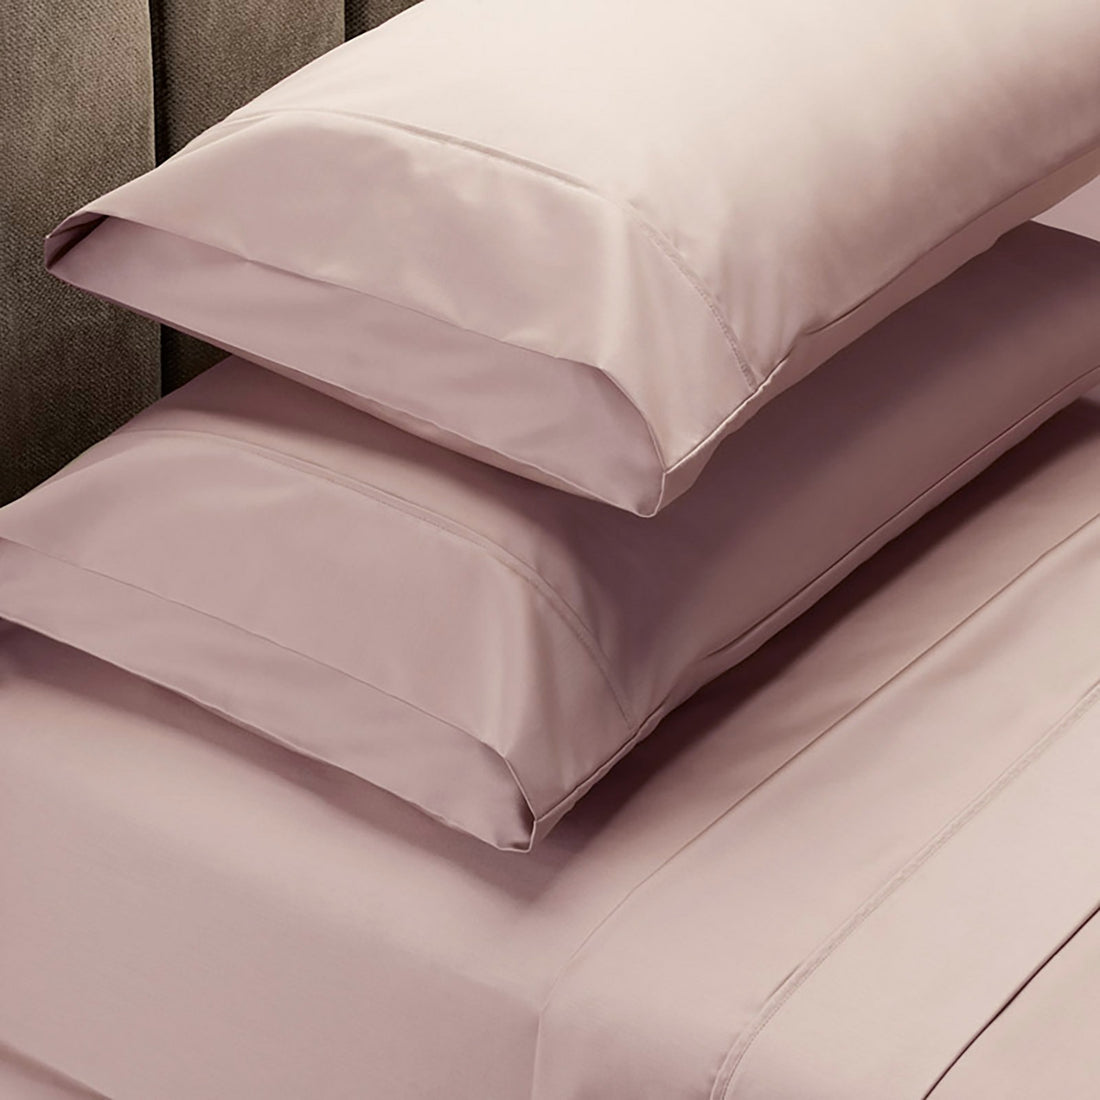 Royal Comfort 1000 Thread Count Sheet Set Cotton Blend Ultra Soft Touch Bedding-Bed Linen-PEROZ Accessories